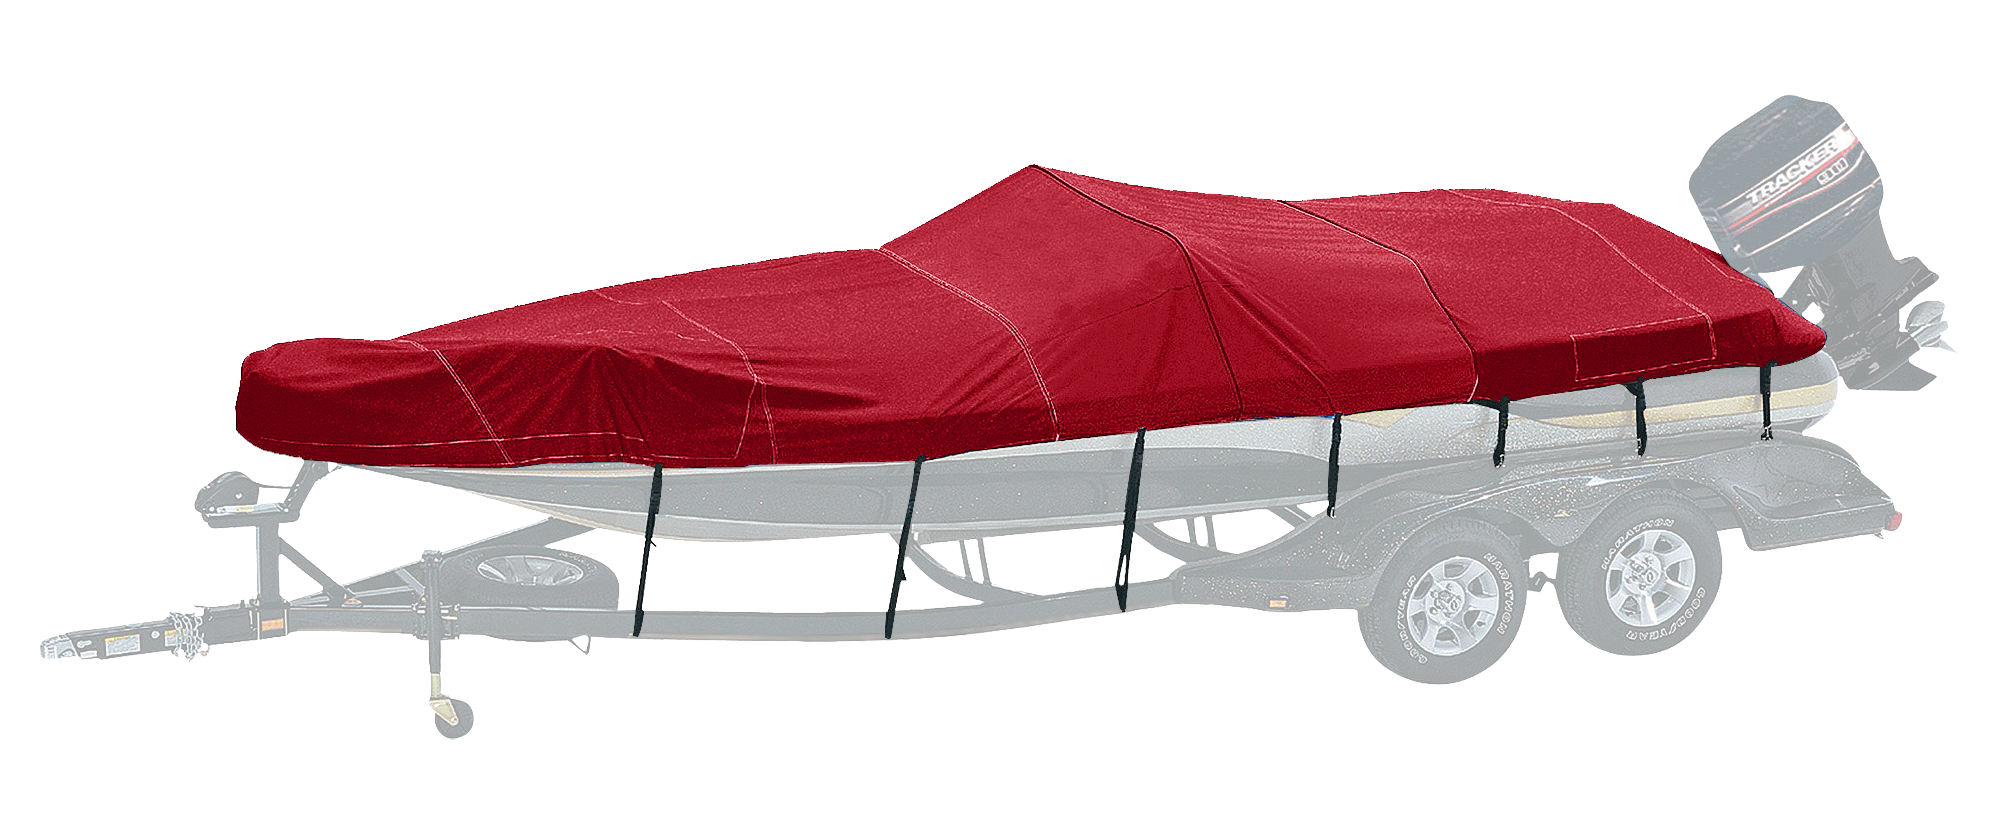 Bass Pro Shops Exact Fit Custom Boat Cover by Westland - Tracker Boats - 2002-2005 Panfish 16 SC - Burgundy